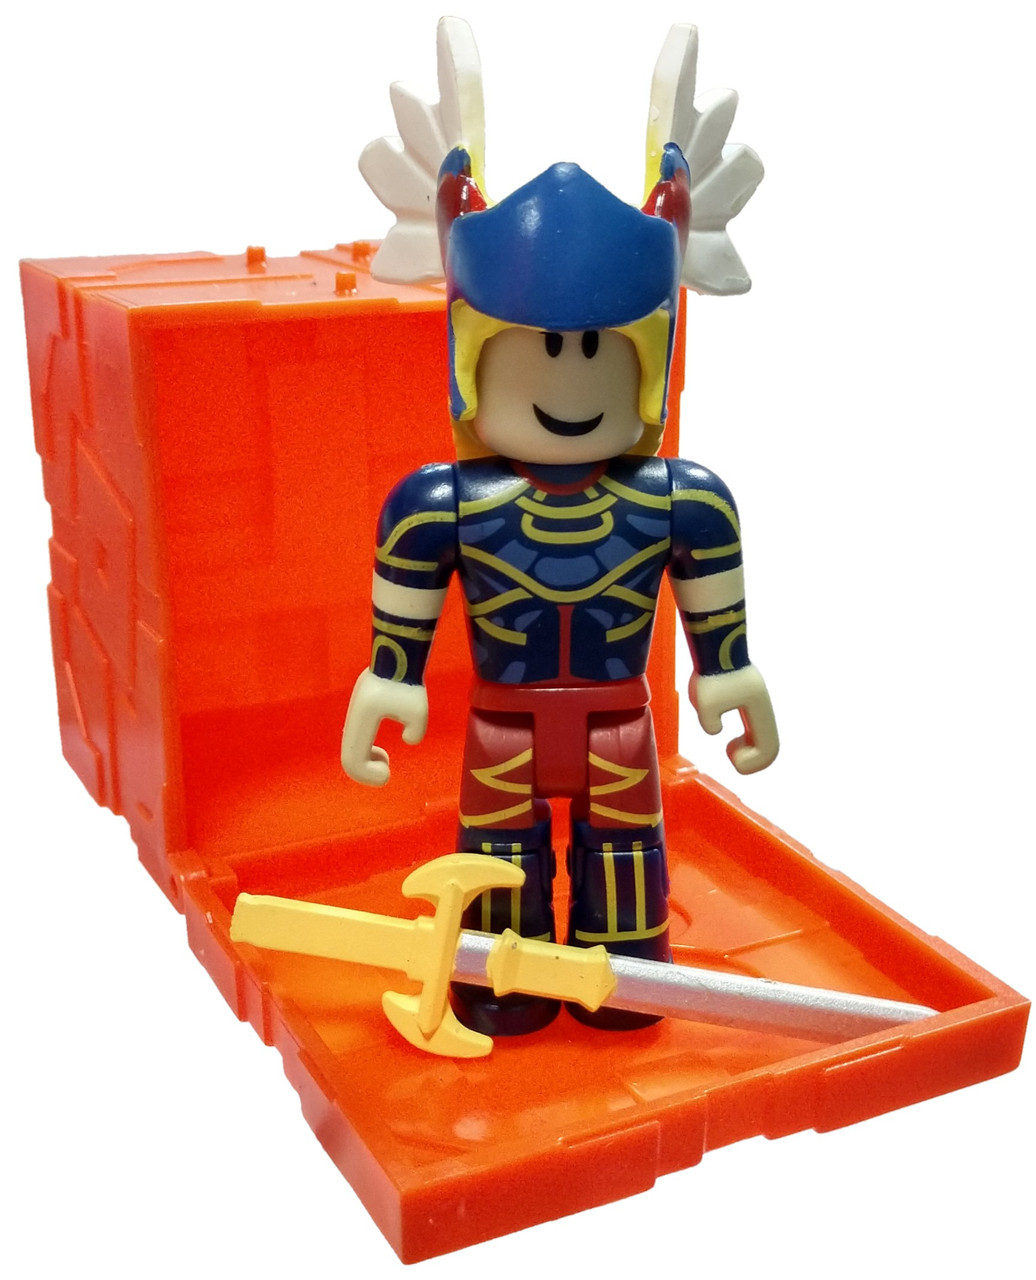 Roblox Series 6 Summoner Tycoon Valkyrie 3 Mini Figure With Orange Cube And Online Code Loose Jazwares Toywiz - galaxy valkyrie roblox